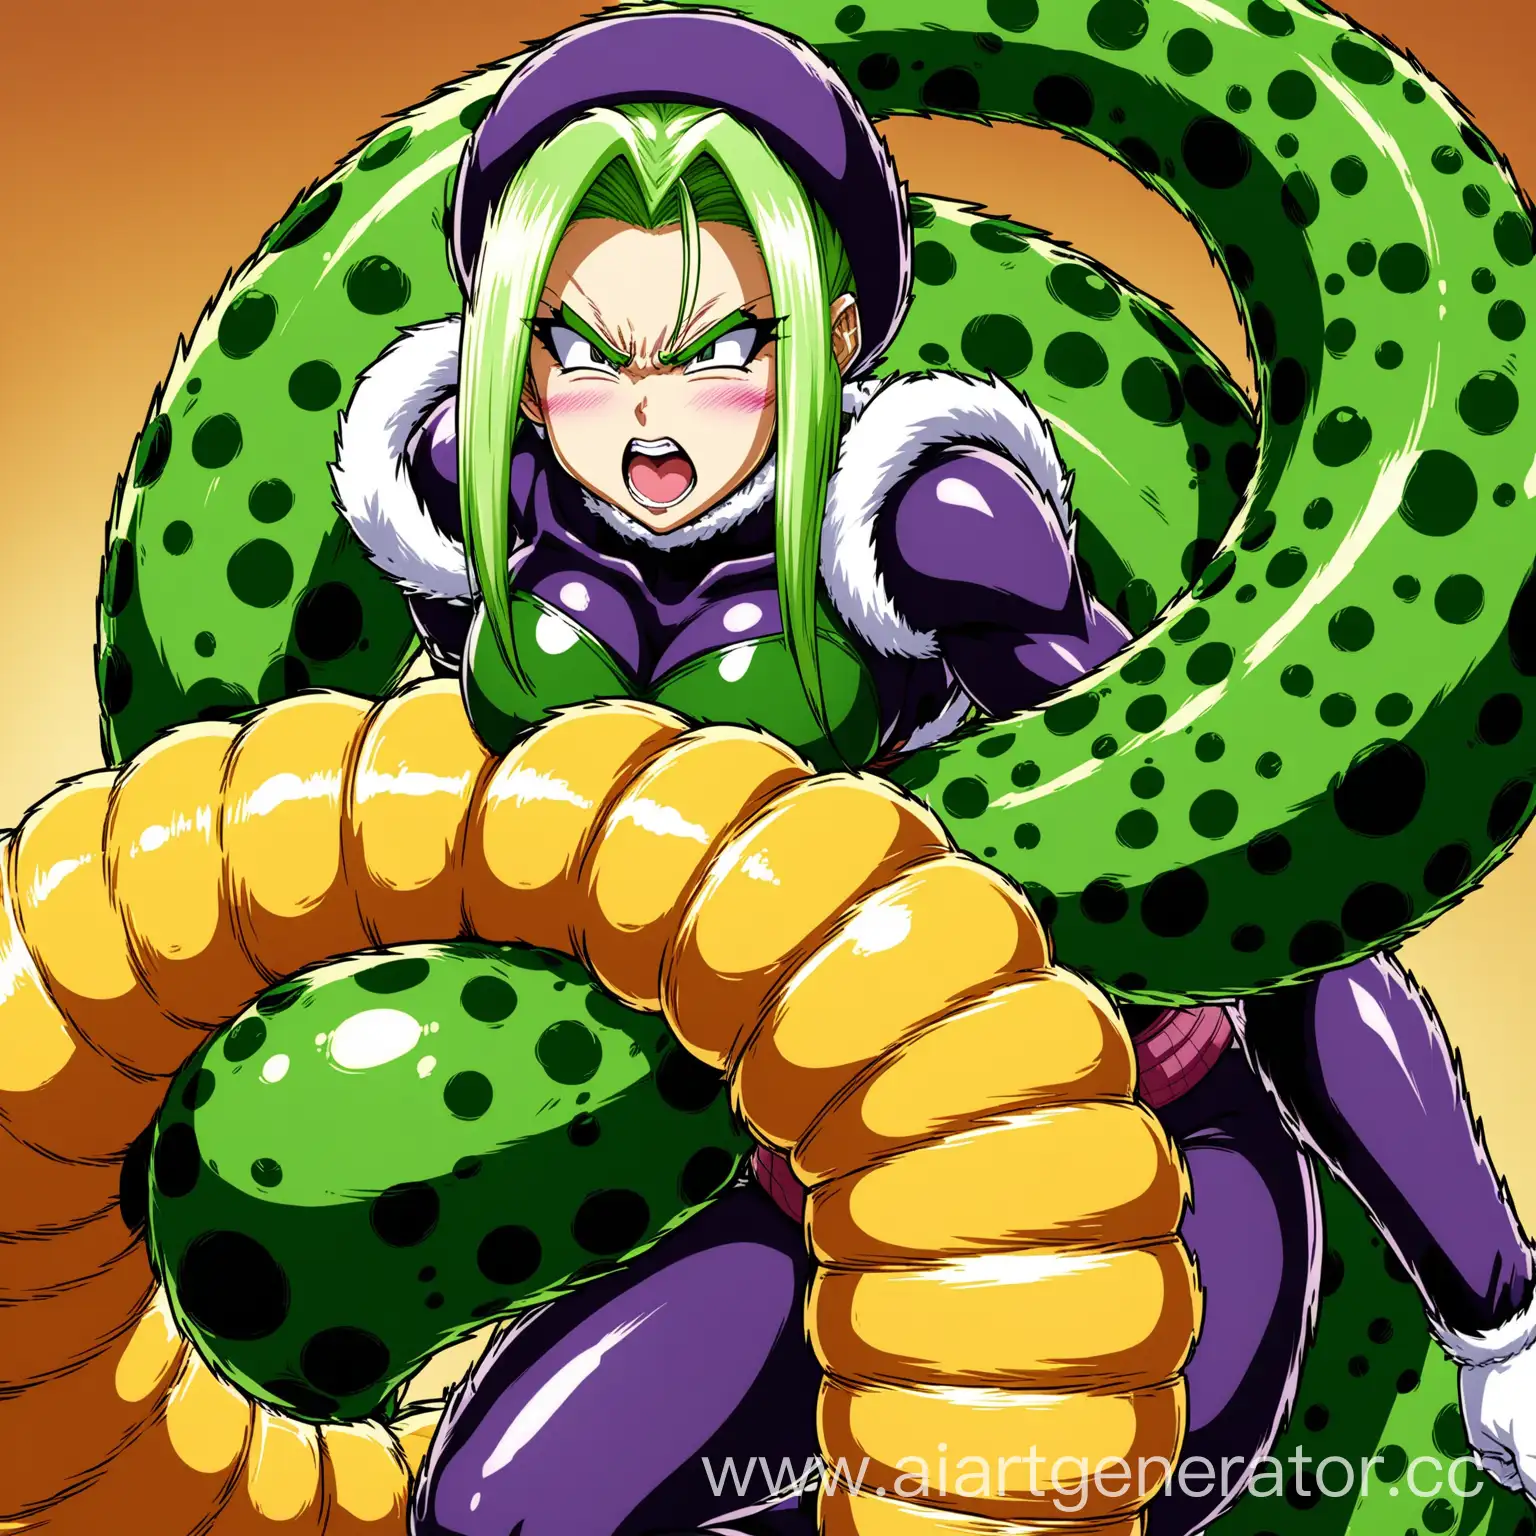 female "perfect cell" from "dragon ball z" "absorbing" :swallowing" 
someone "through her tail"
